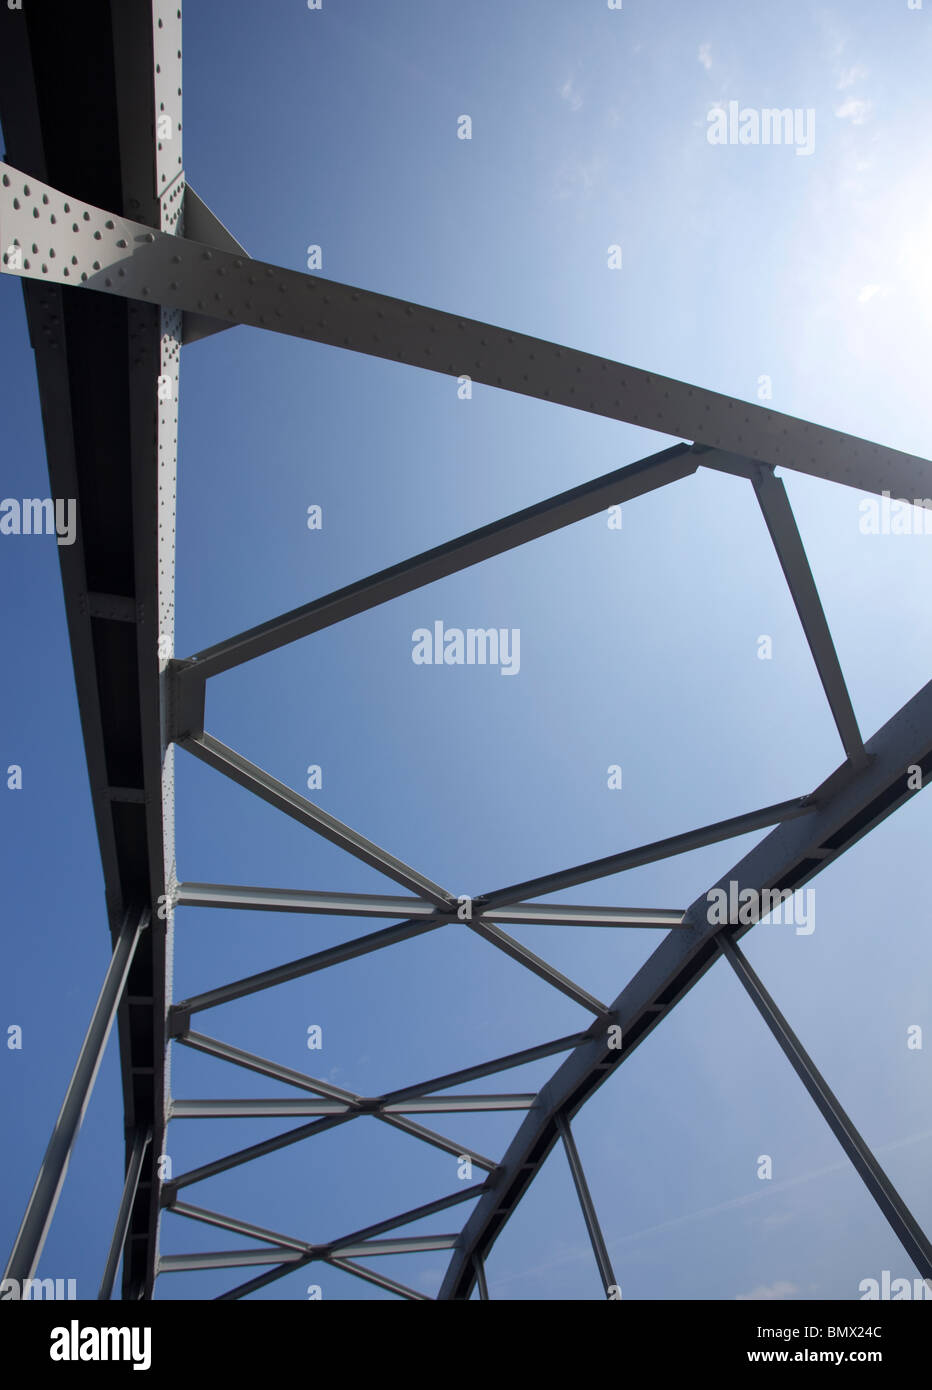 Arched iron bridge top support structure Stock Photo